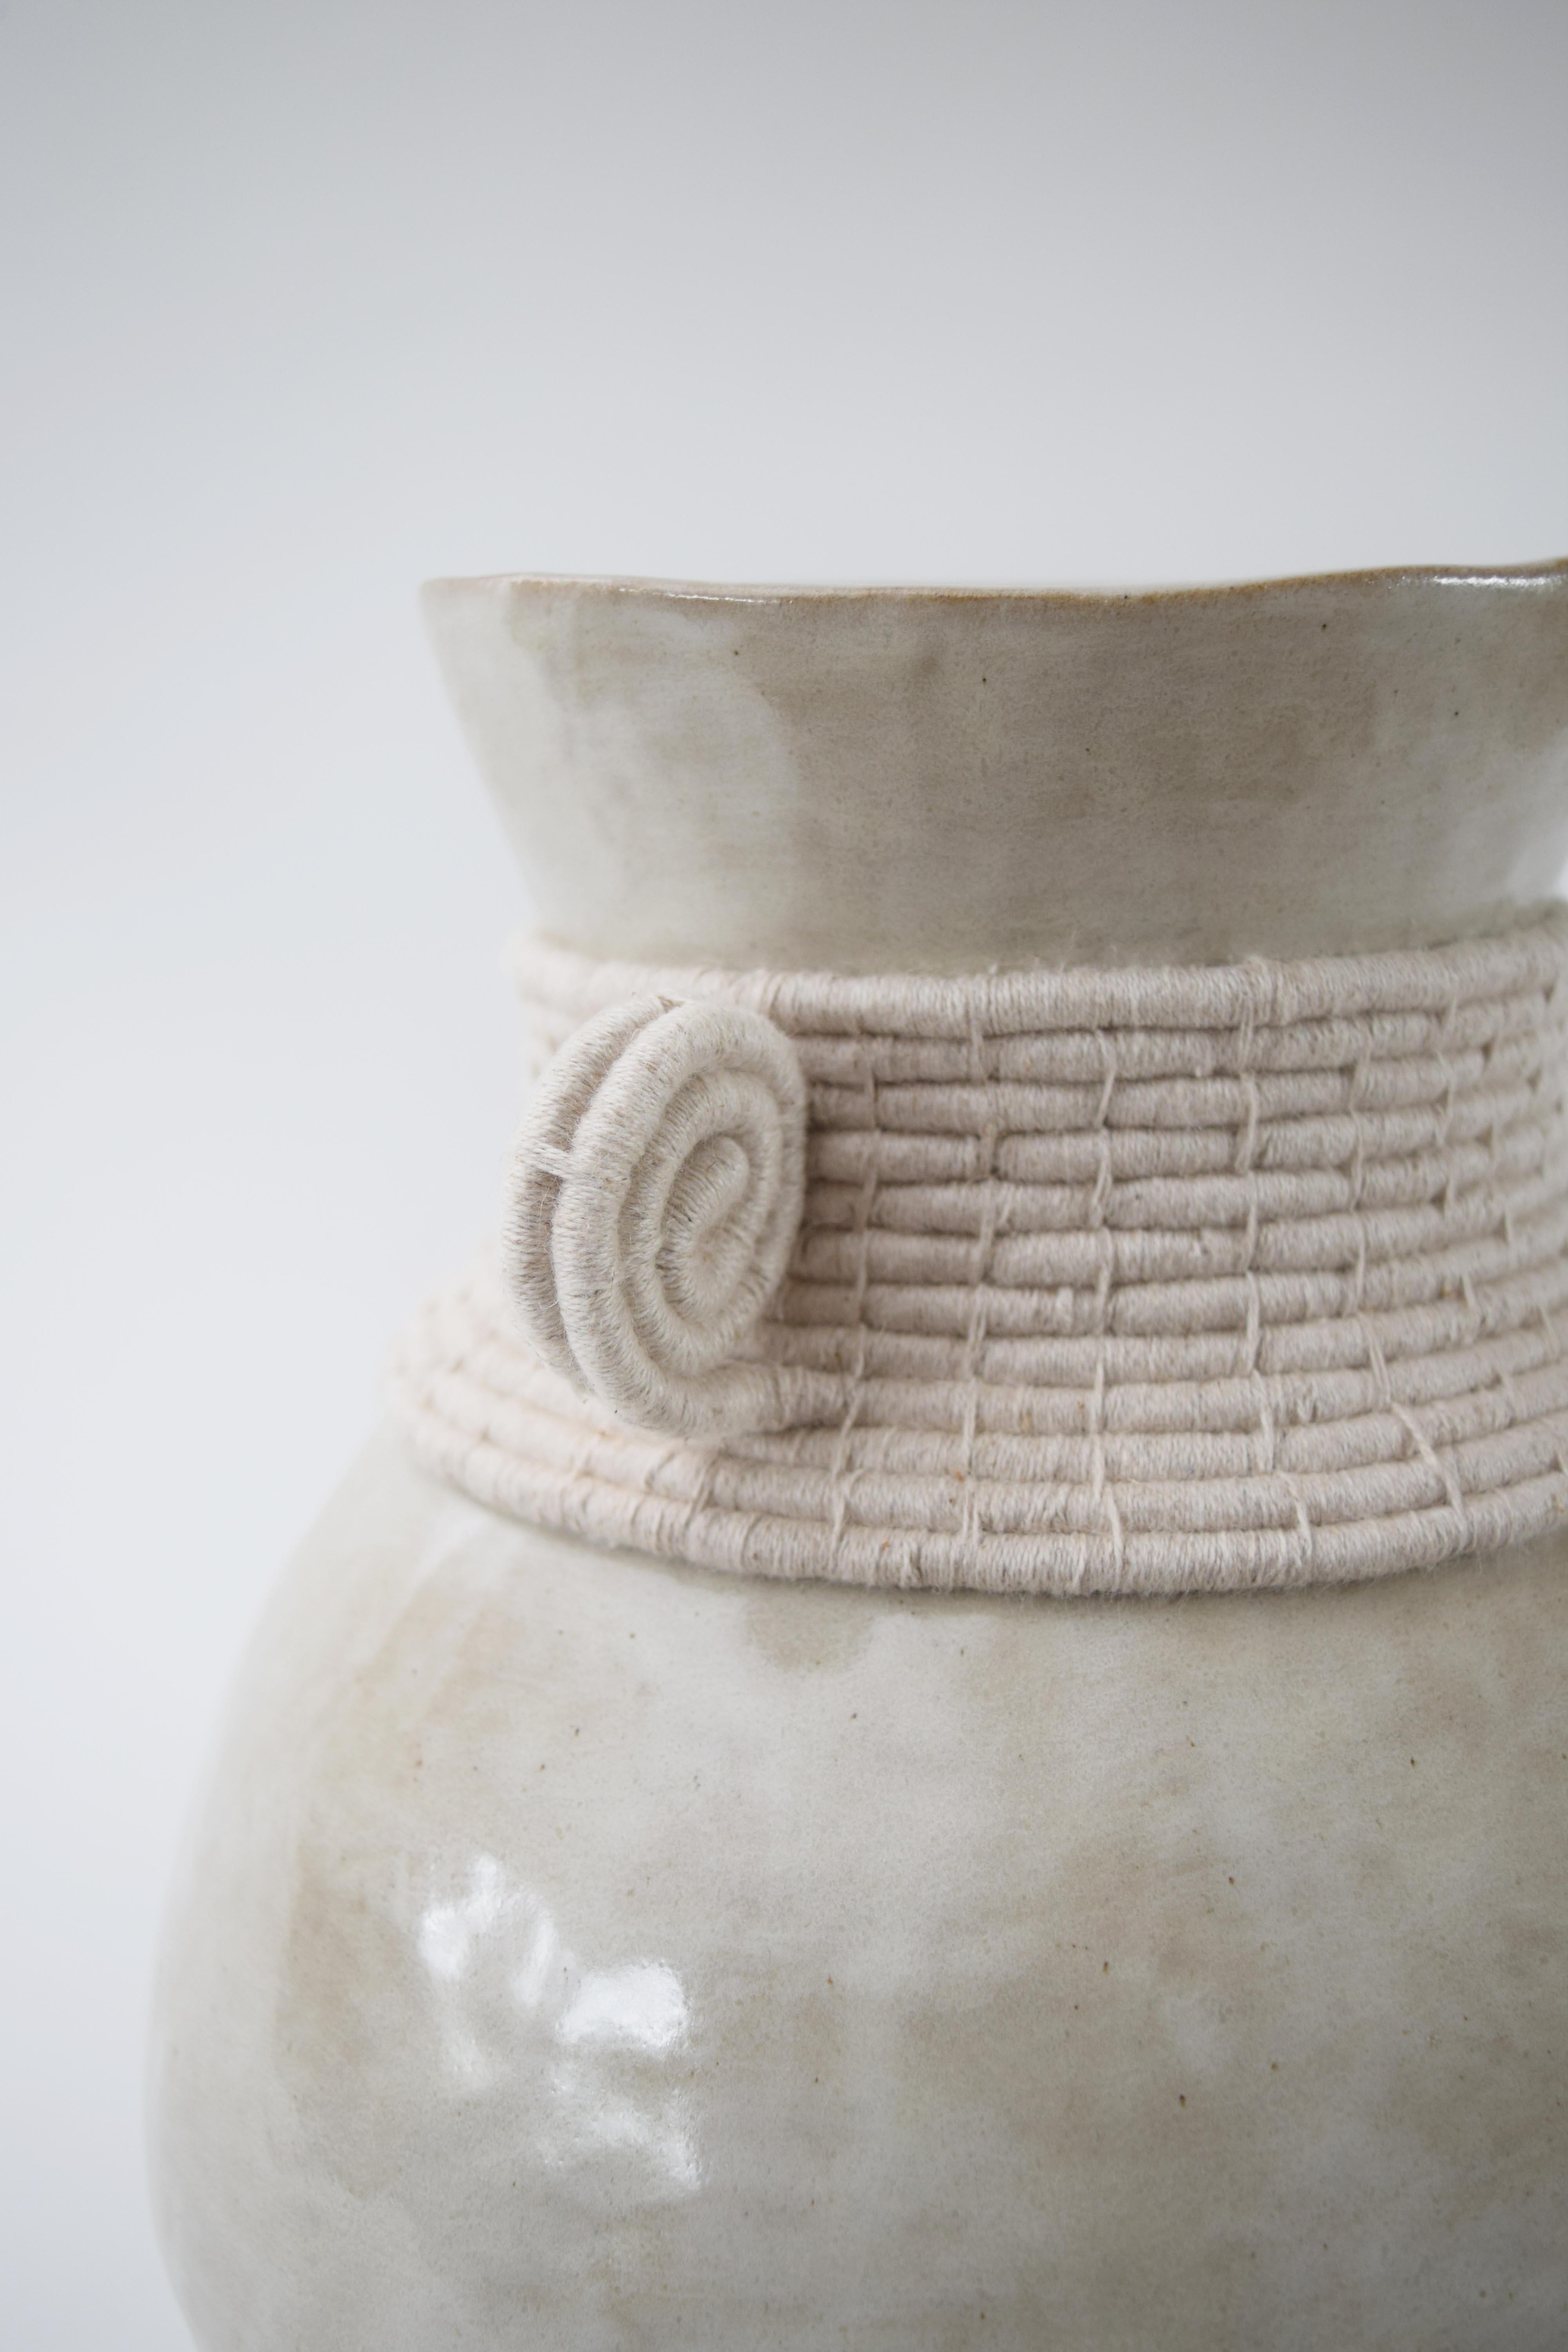 American One of a Kind Handmade Ceramic Vase #796 - Off White Glaze & Woven Cotton Detail